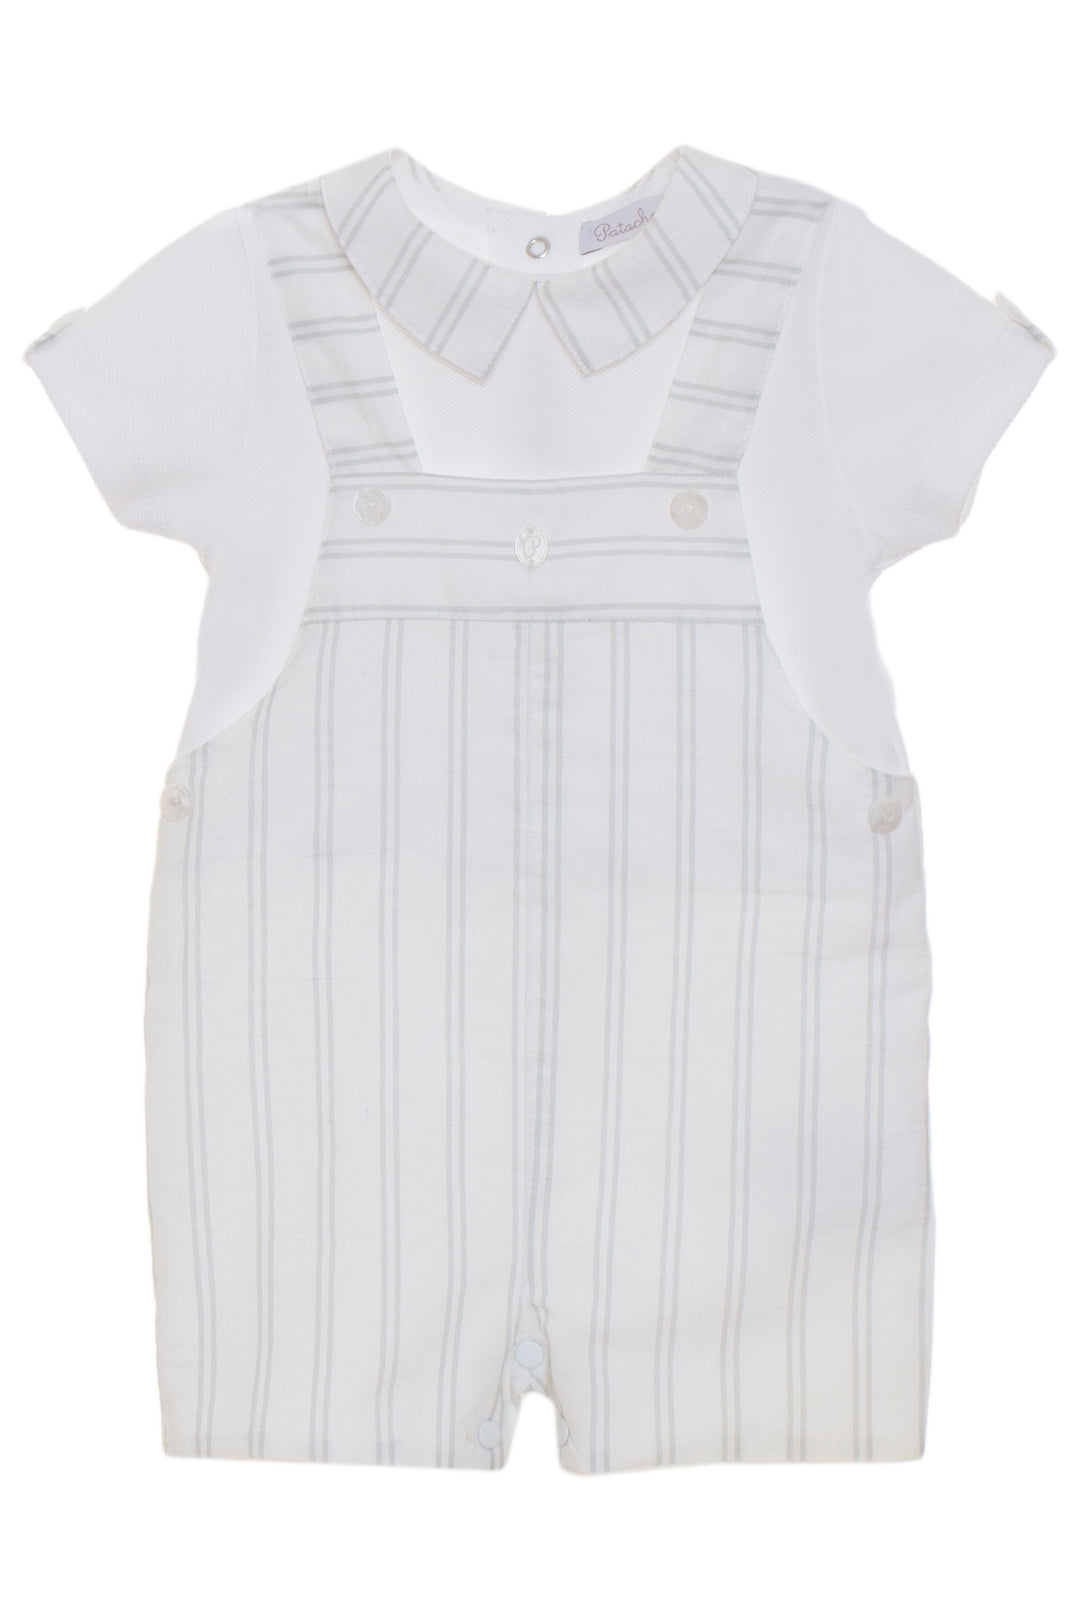 Patachou "Wren" Grey Striped Dungaree Romper | iphoneandroidapplications